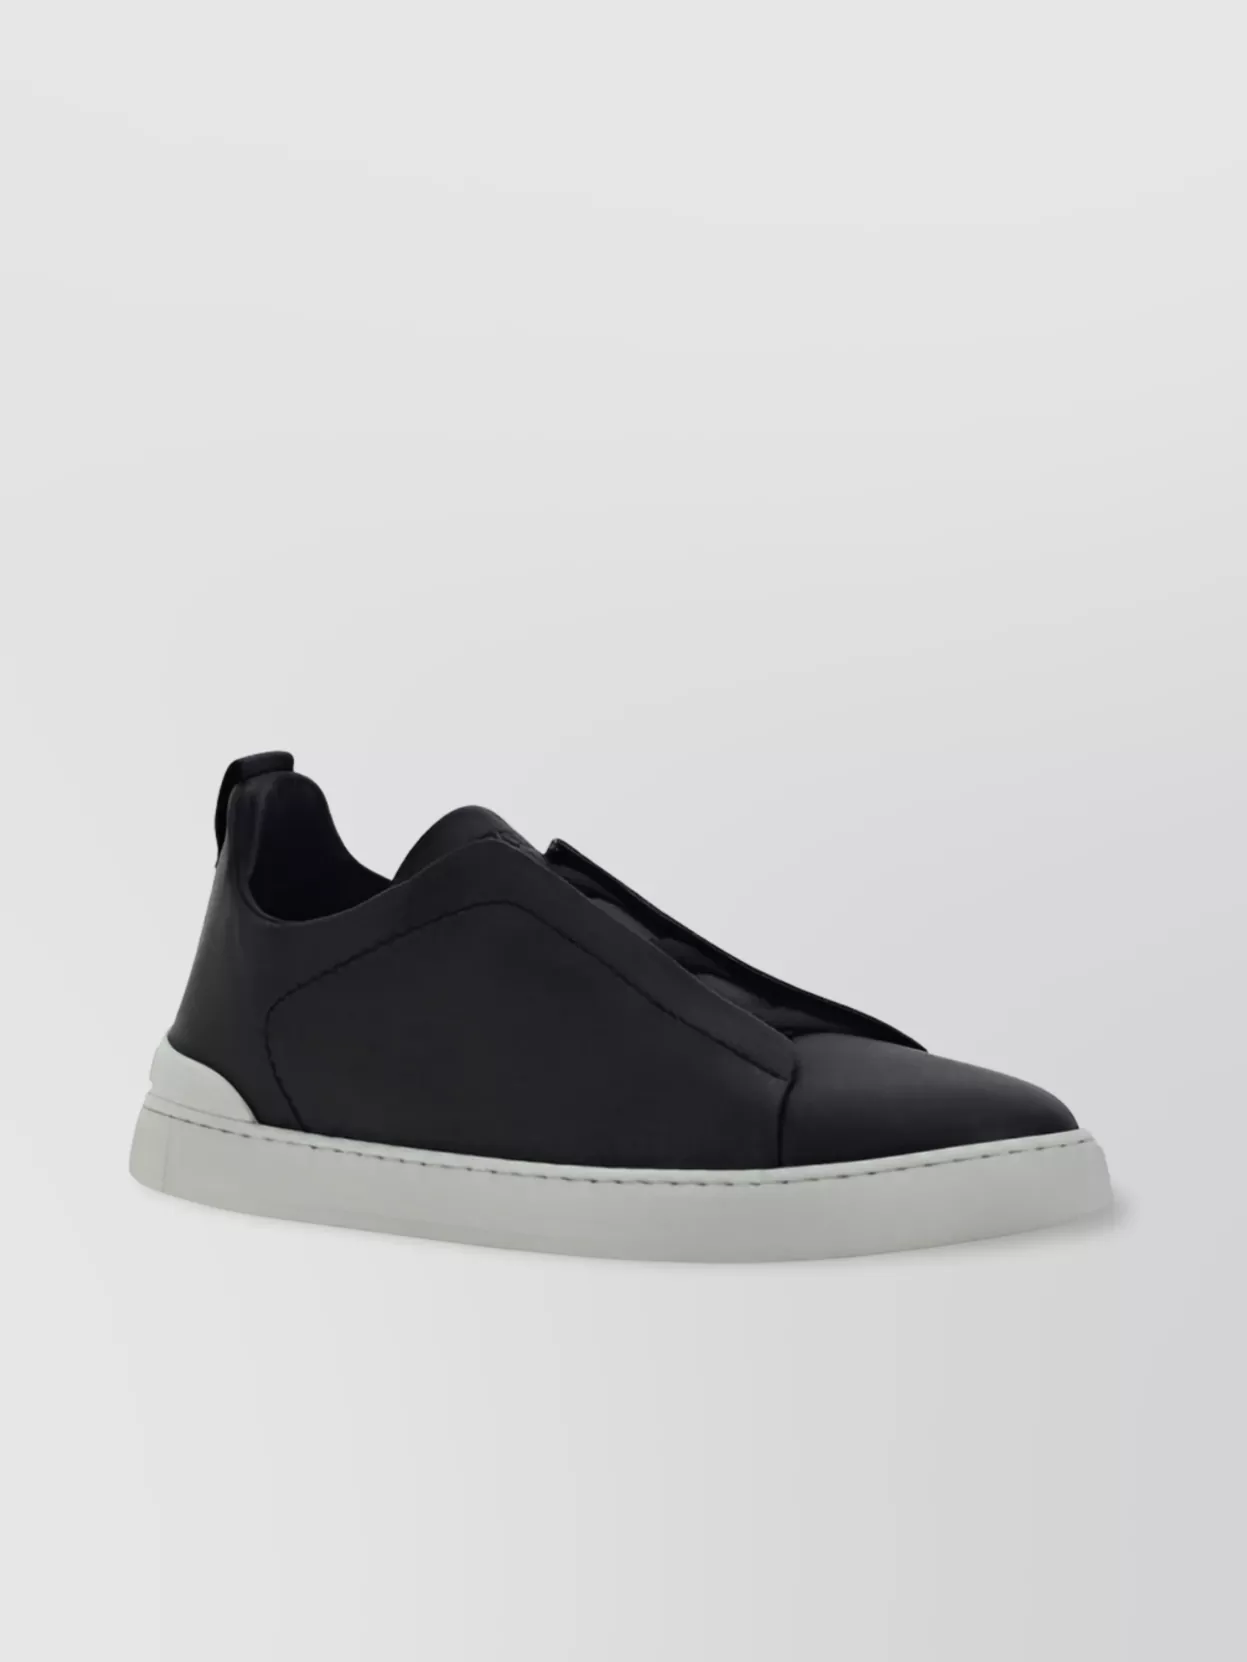 Zegna Leather Low-top Sneakers Contrast Sole